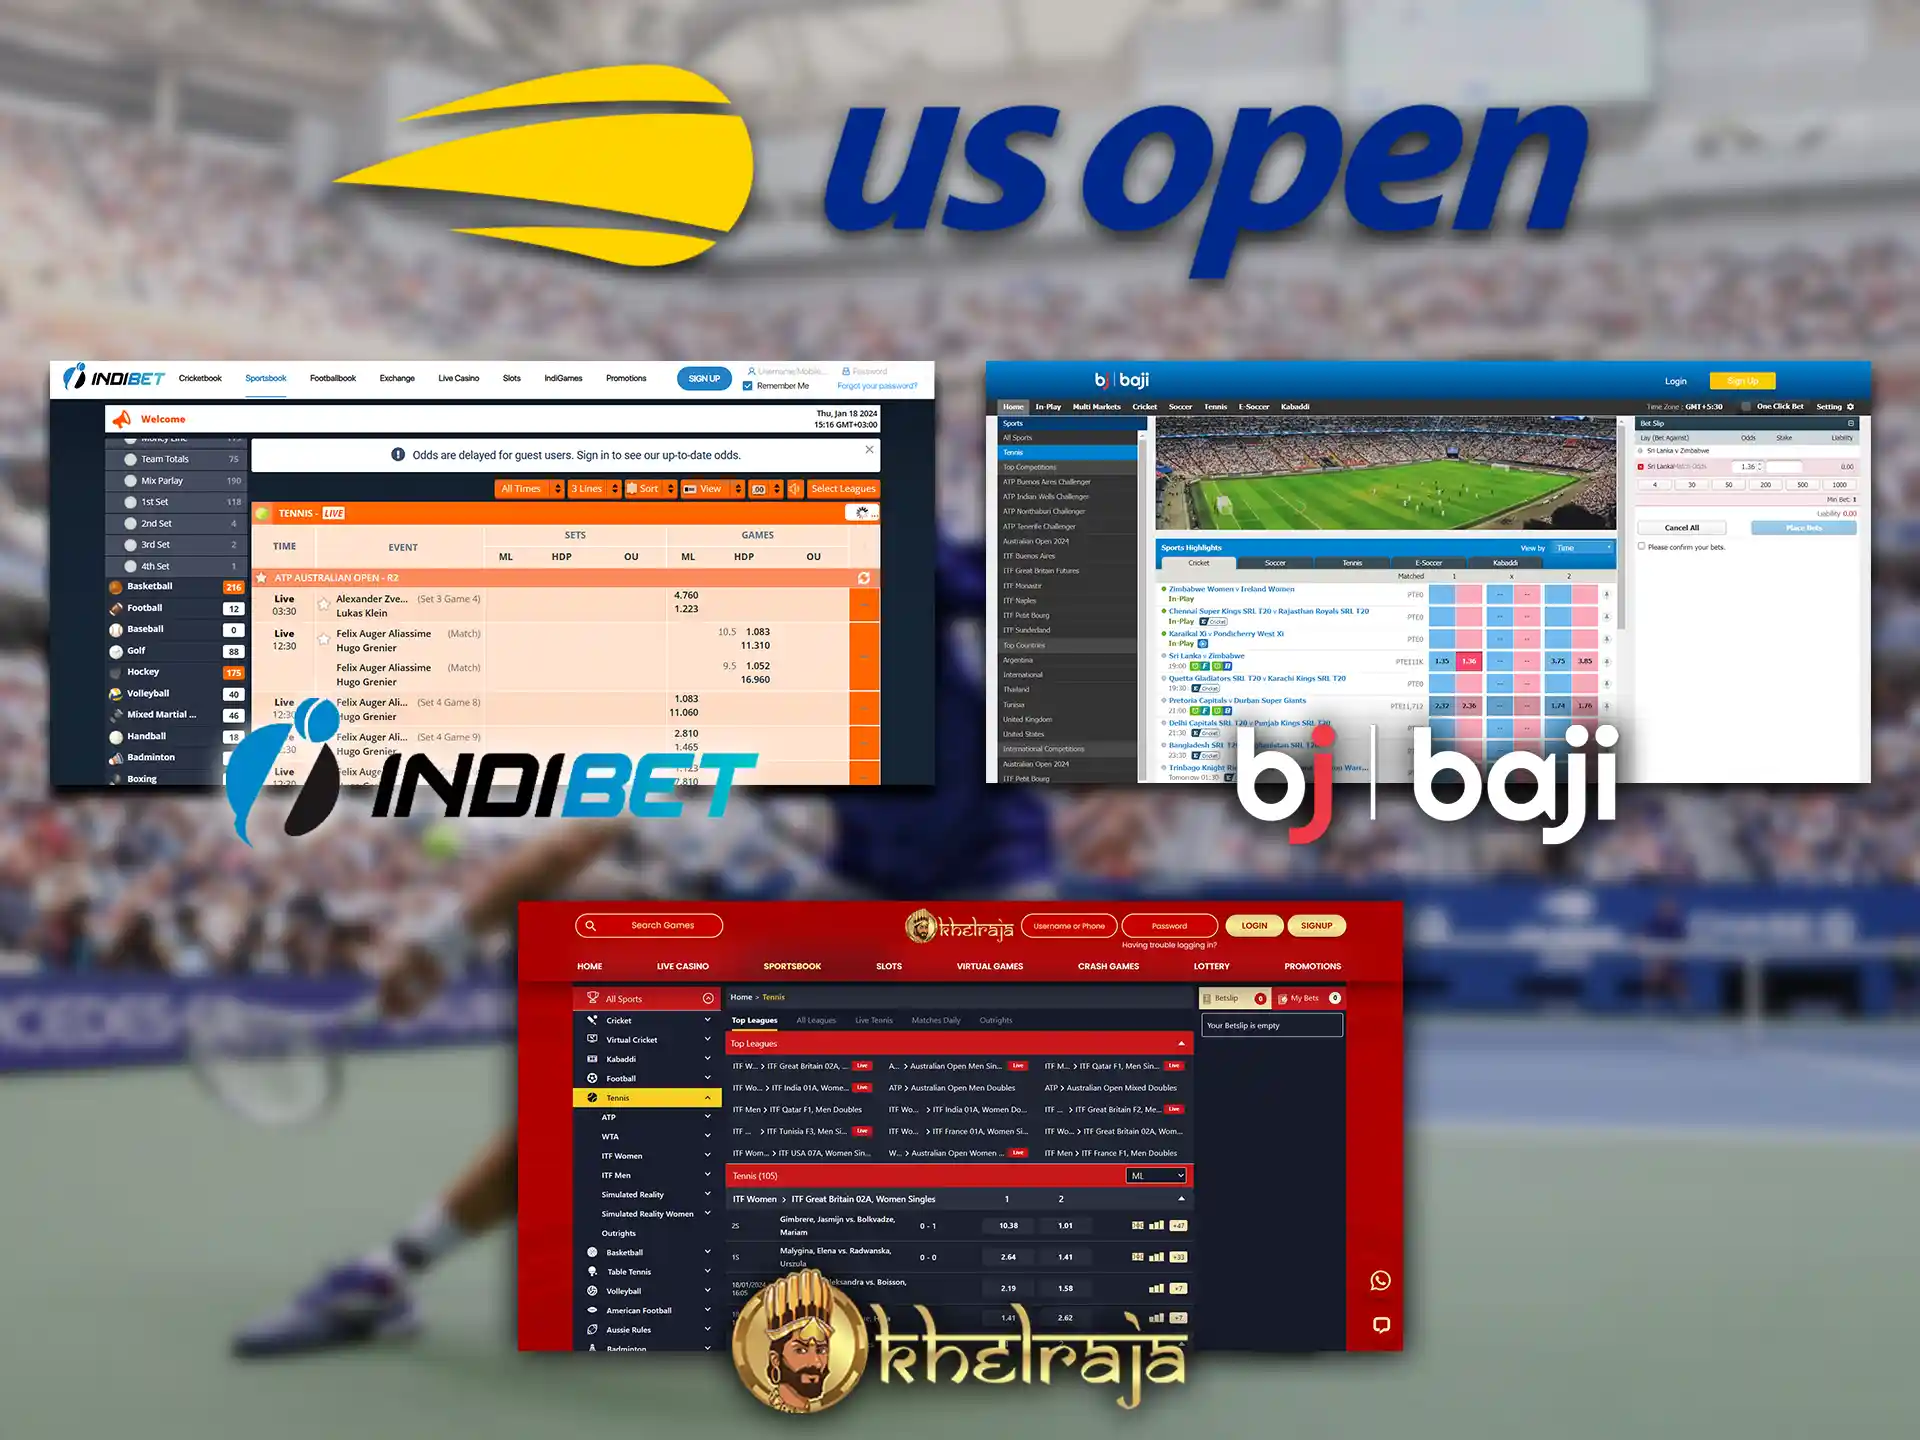 Place great bets on the US Open with Indibet, Khelraja or Baji Live.